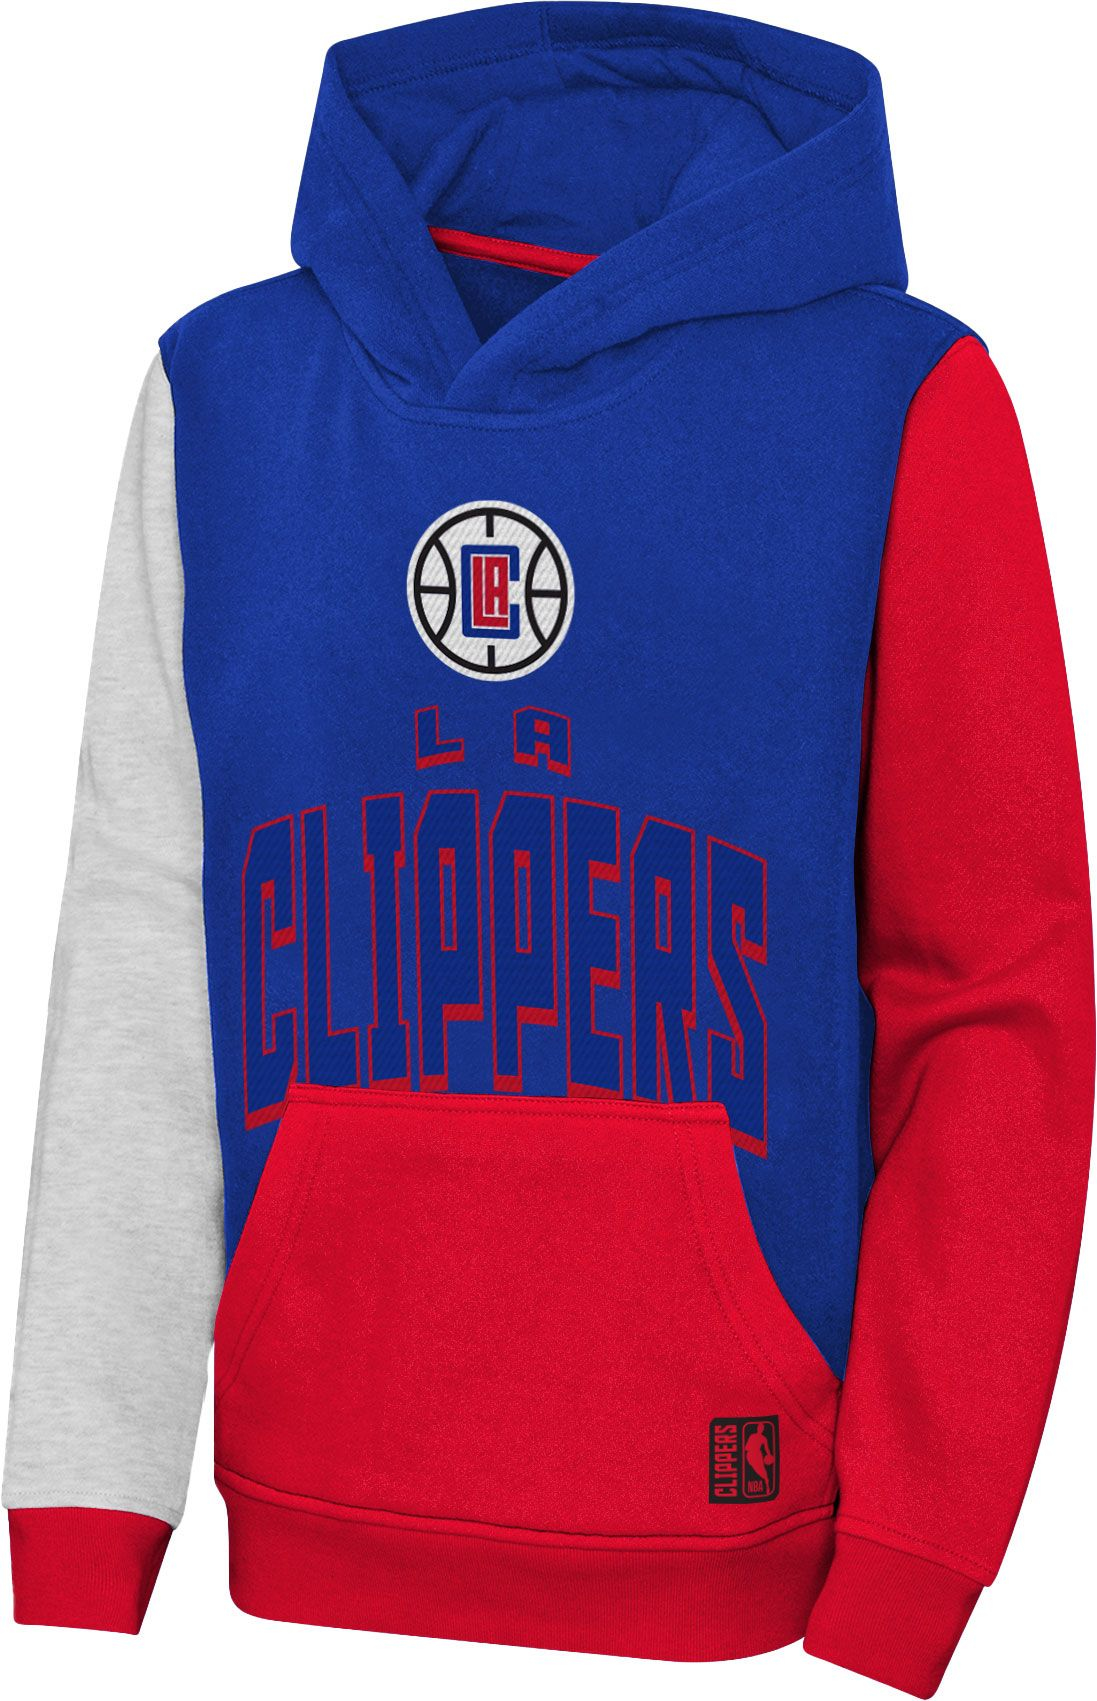 Outerstuff Youth Los Angeles Clippers Stadium Pullover Royal Hoodie, Boys', XL, Blue